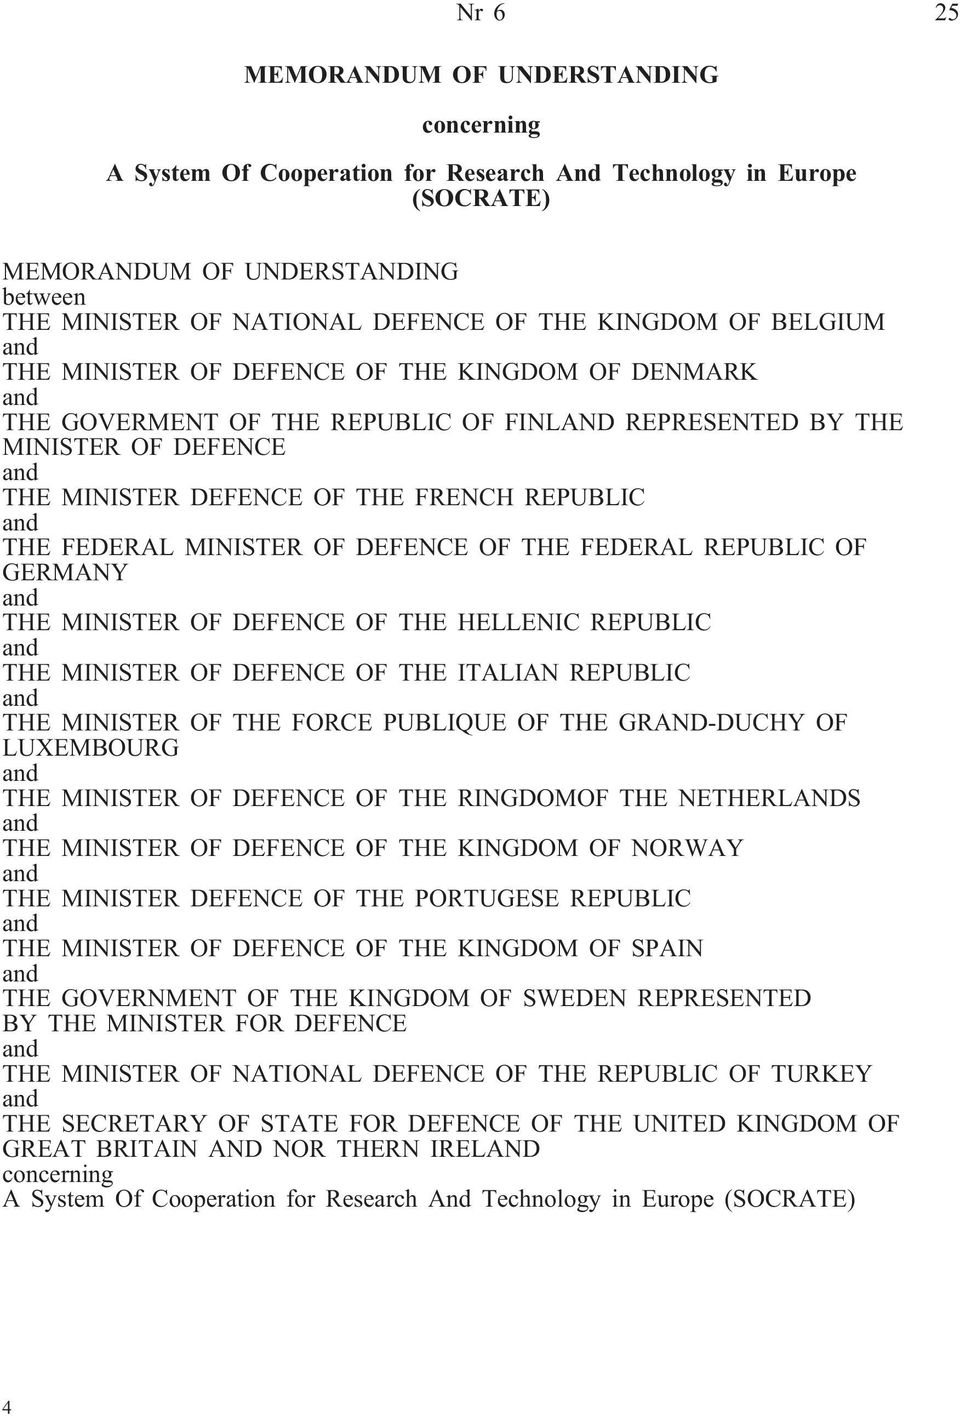 REPUBLIC and THE FEDERAL MINISTER OF DEFENCE OF THE FEDERAL REPUBLIC OF GERMANY and THE MINISTER OF DEFENCE OF THE HELLENIC REPUBLIC and THE MINISTER OF DEFENCE OF THE ITALIAN REPUBLIC and THE